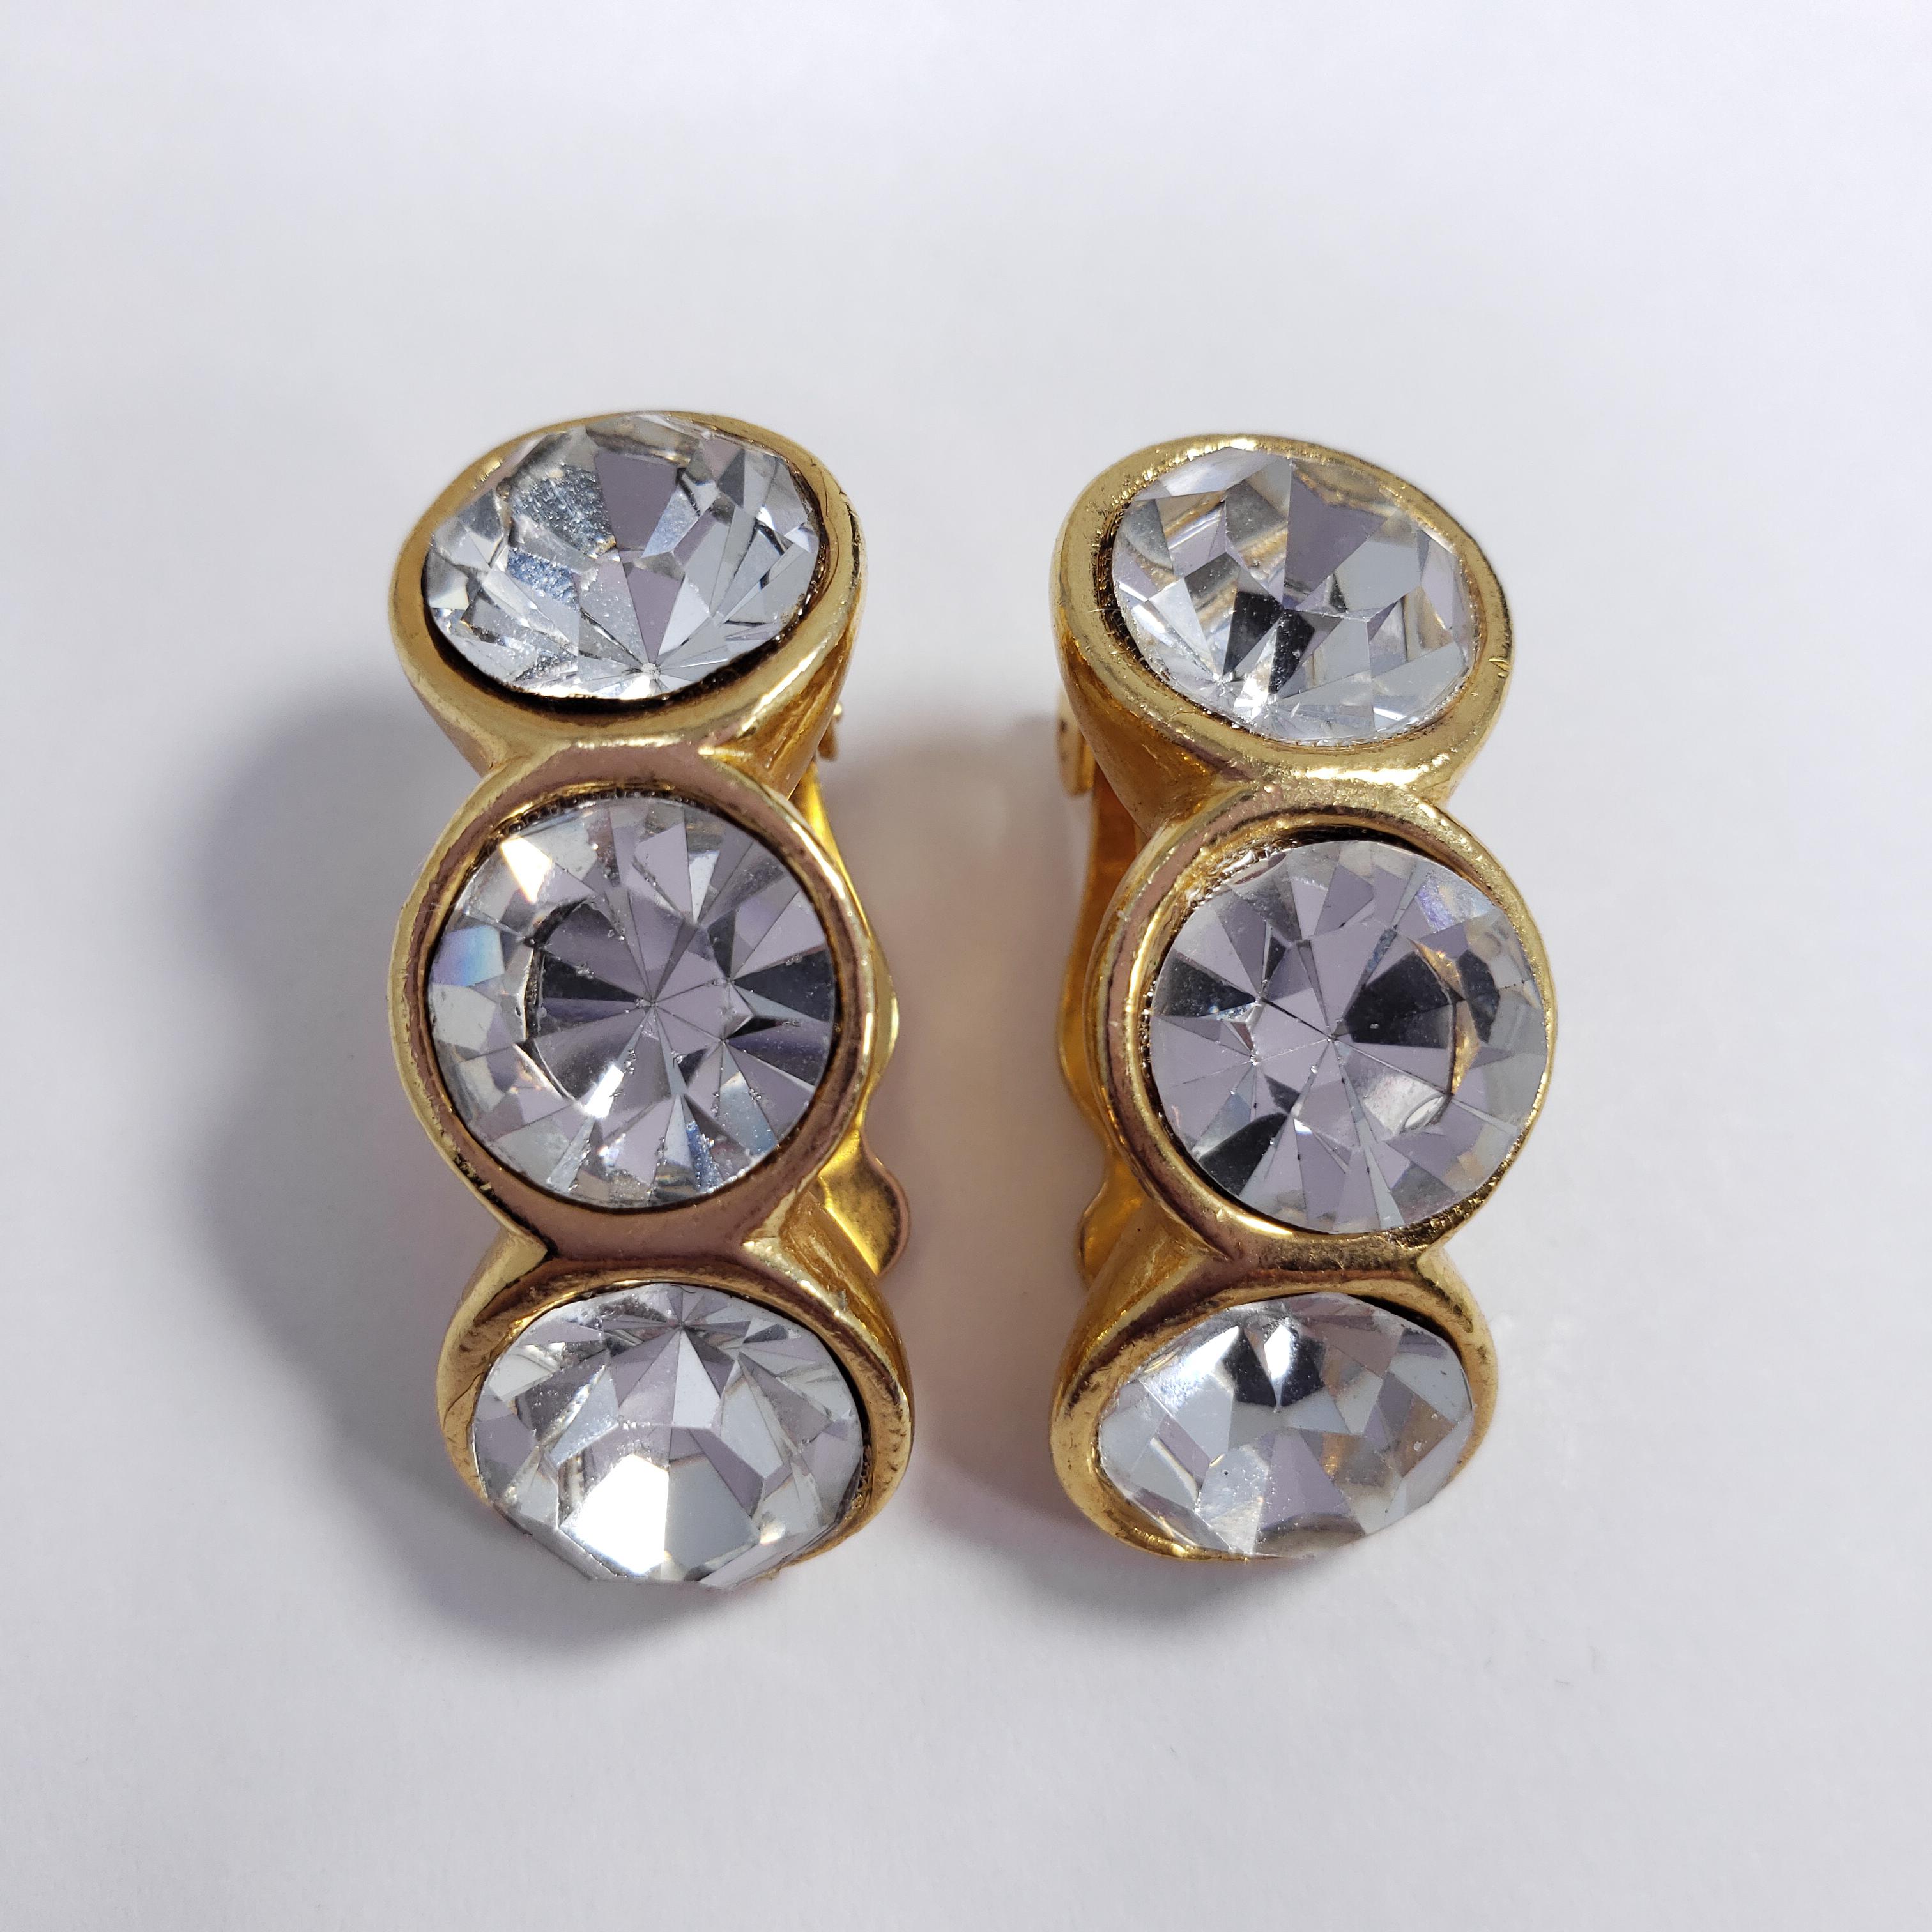 A pair of stylish clip on earrings. Each earring features three large faceted clear crystals, set in a curved row. Set in gold-tone metal. 